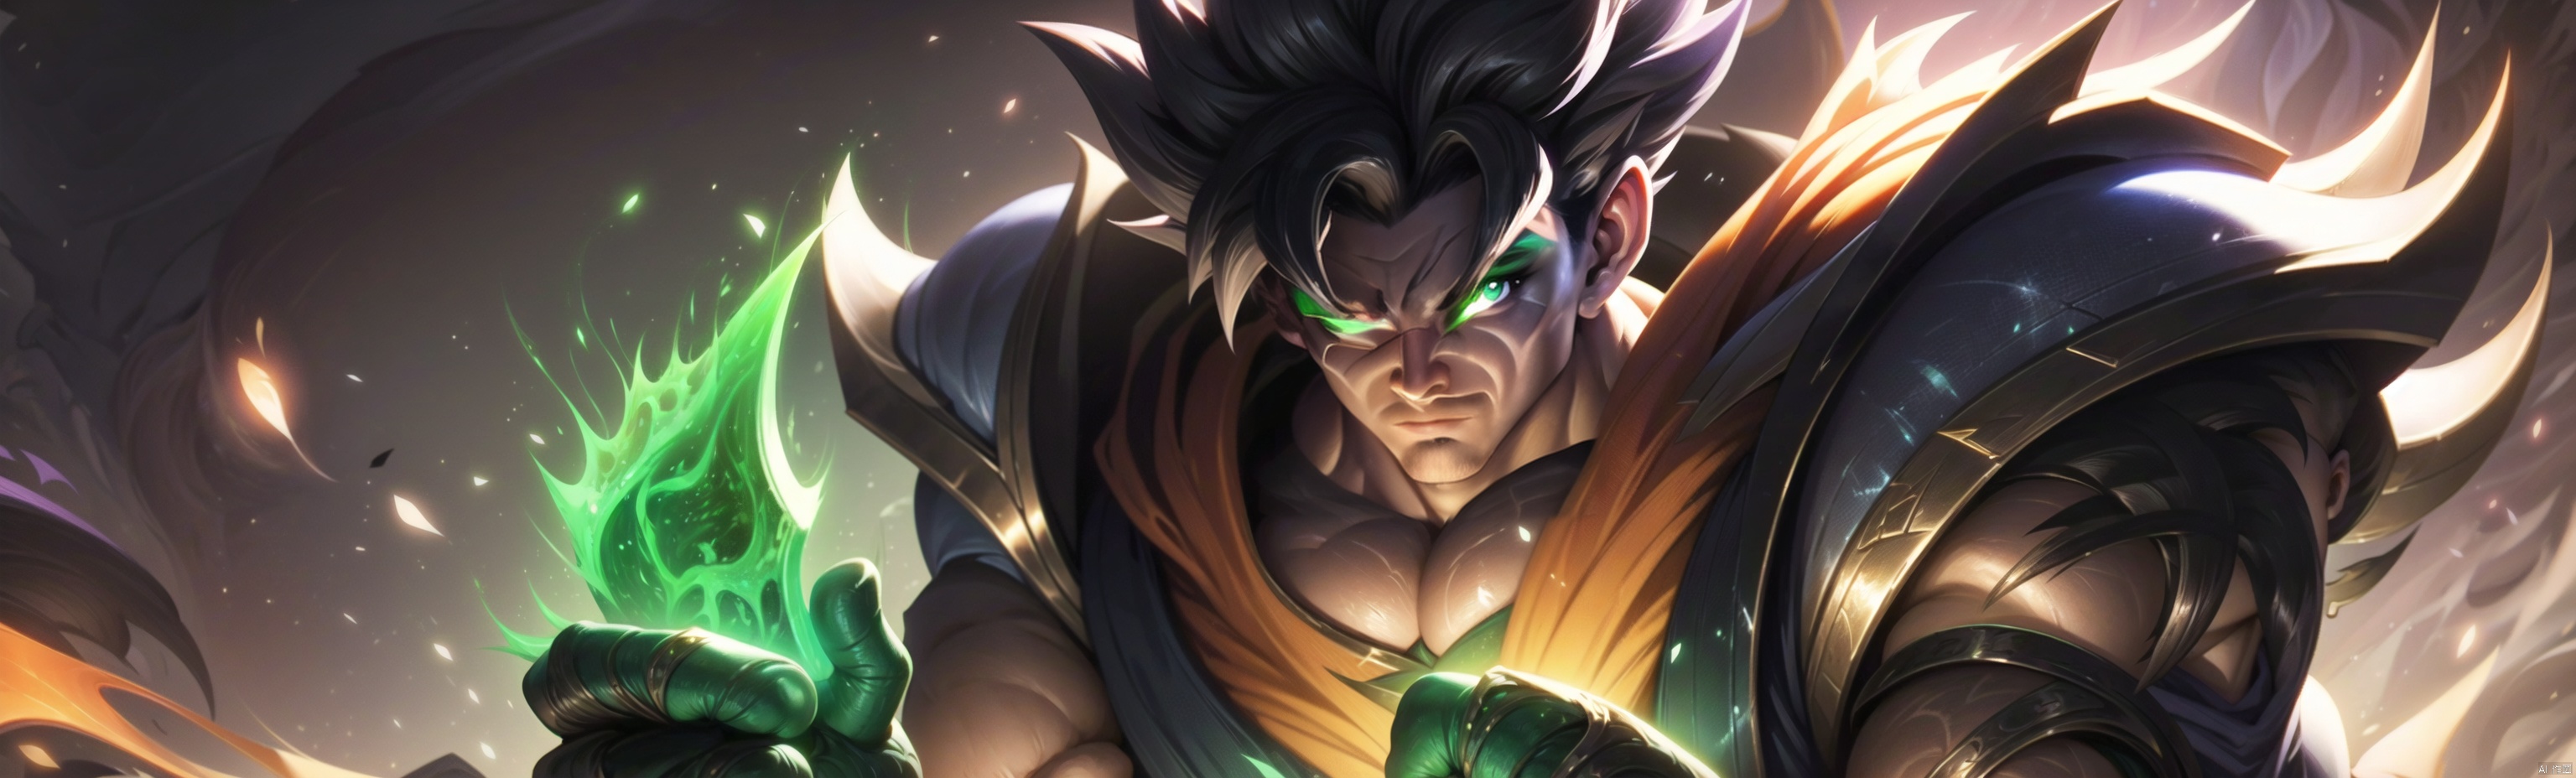  The heroic character in "League of Legends", he wears warrior armor, exudes a green aura, and holds a big knife in his hand. A close-up of a character, this painting adopts the fantasy art style of "League of Legends" illustrations. --ar 128:85, Darius, songoku